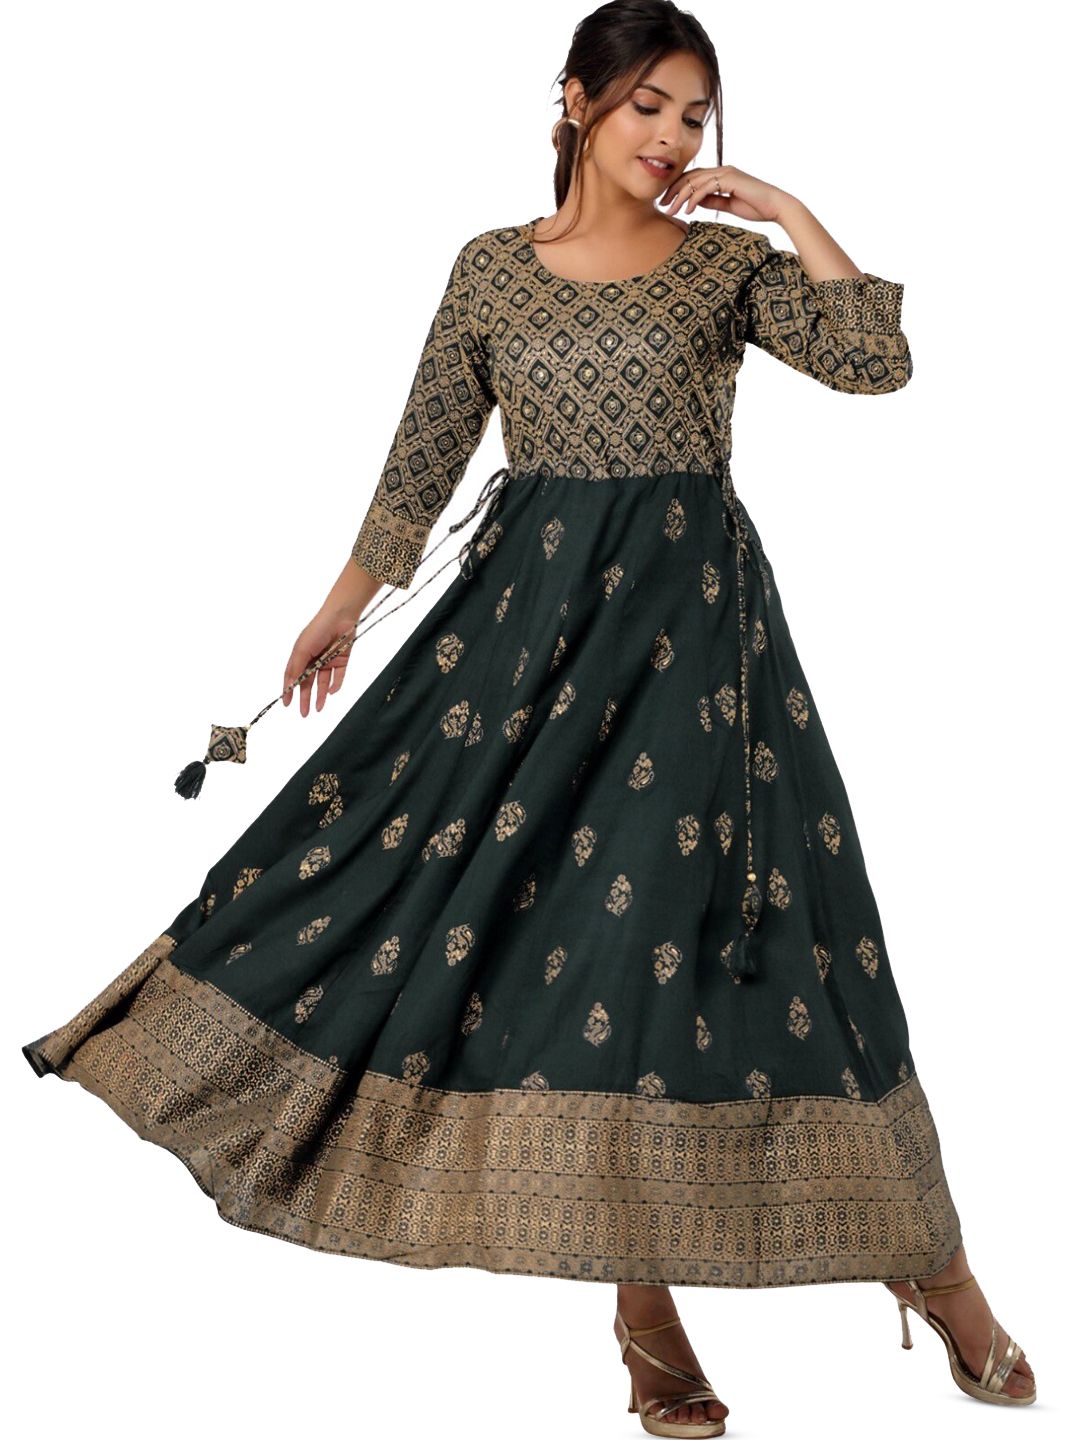 BAESD Ethnic Motifs Print Pleated A-Line Maxi Dress Price in India